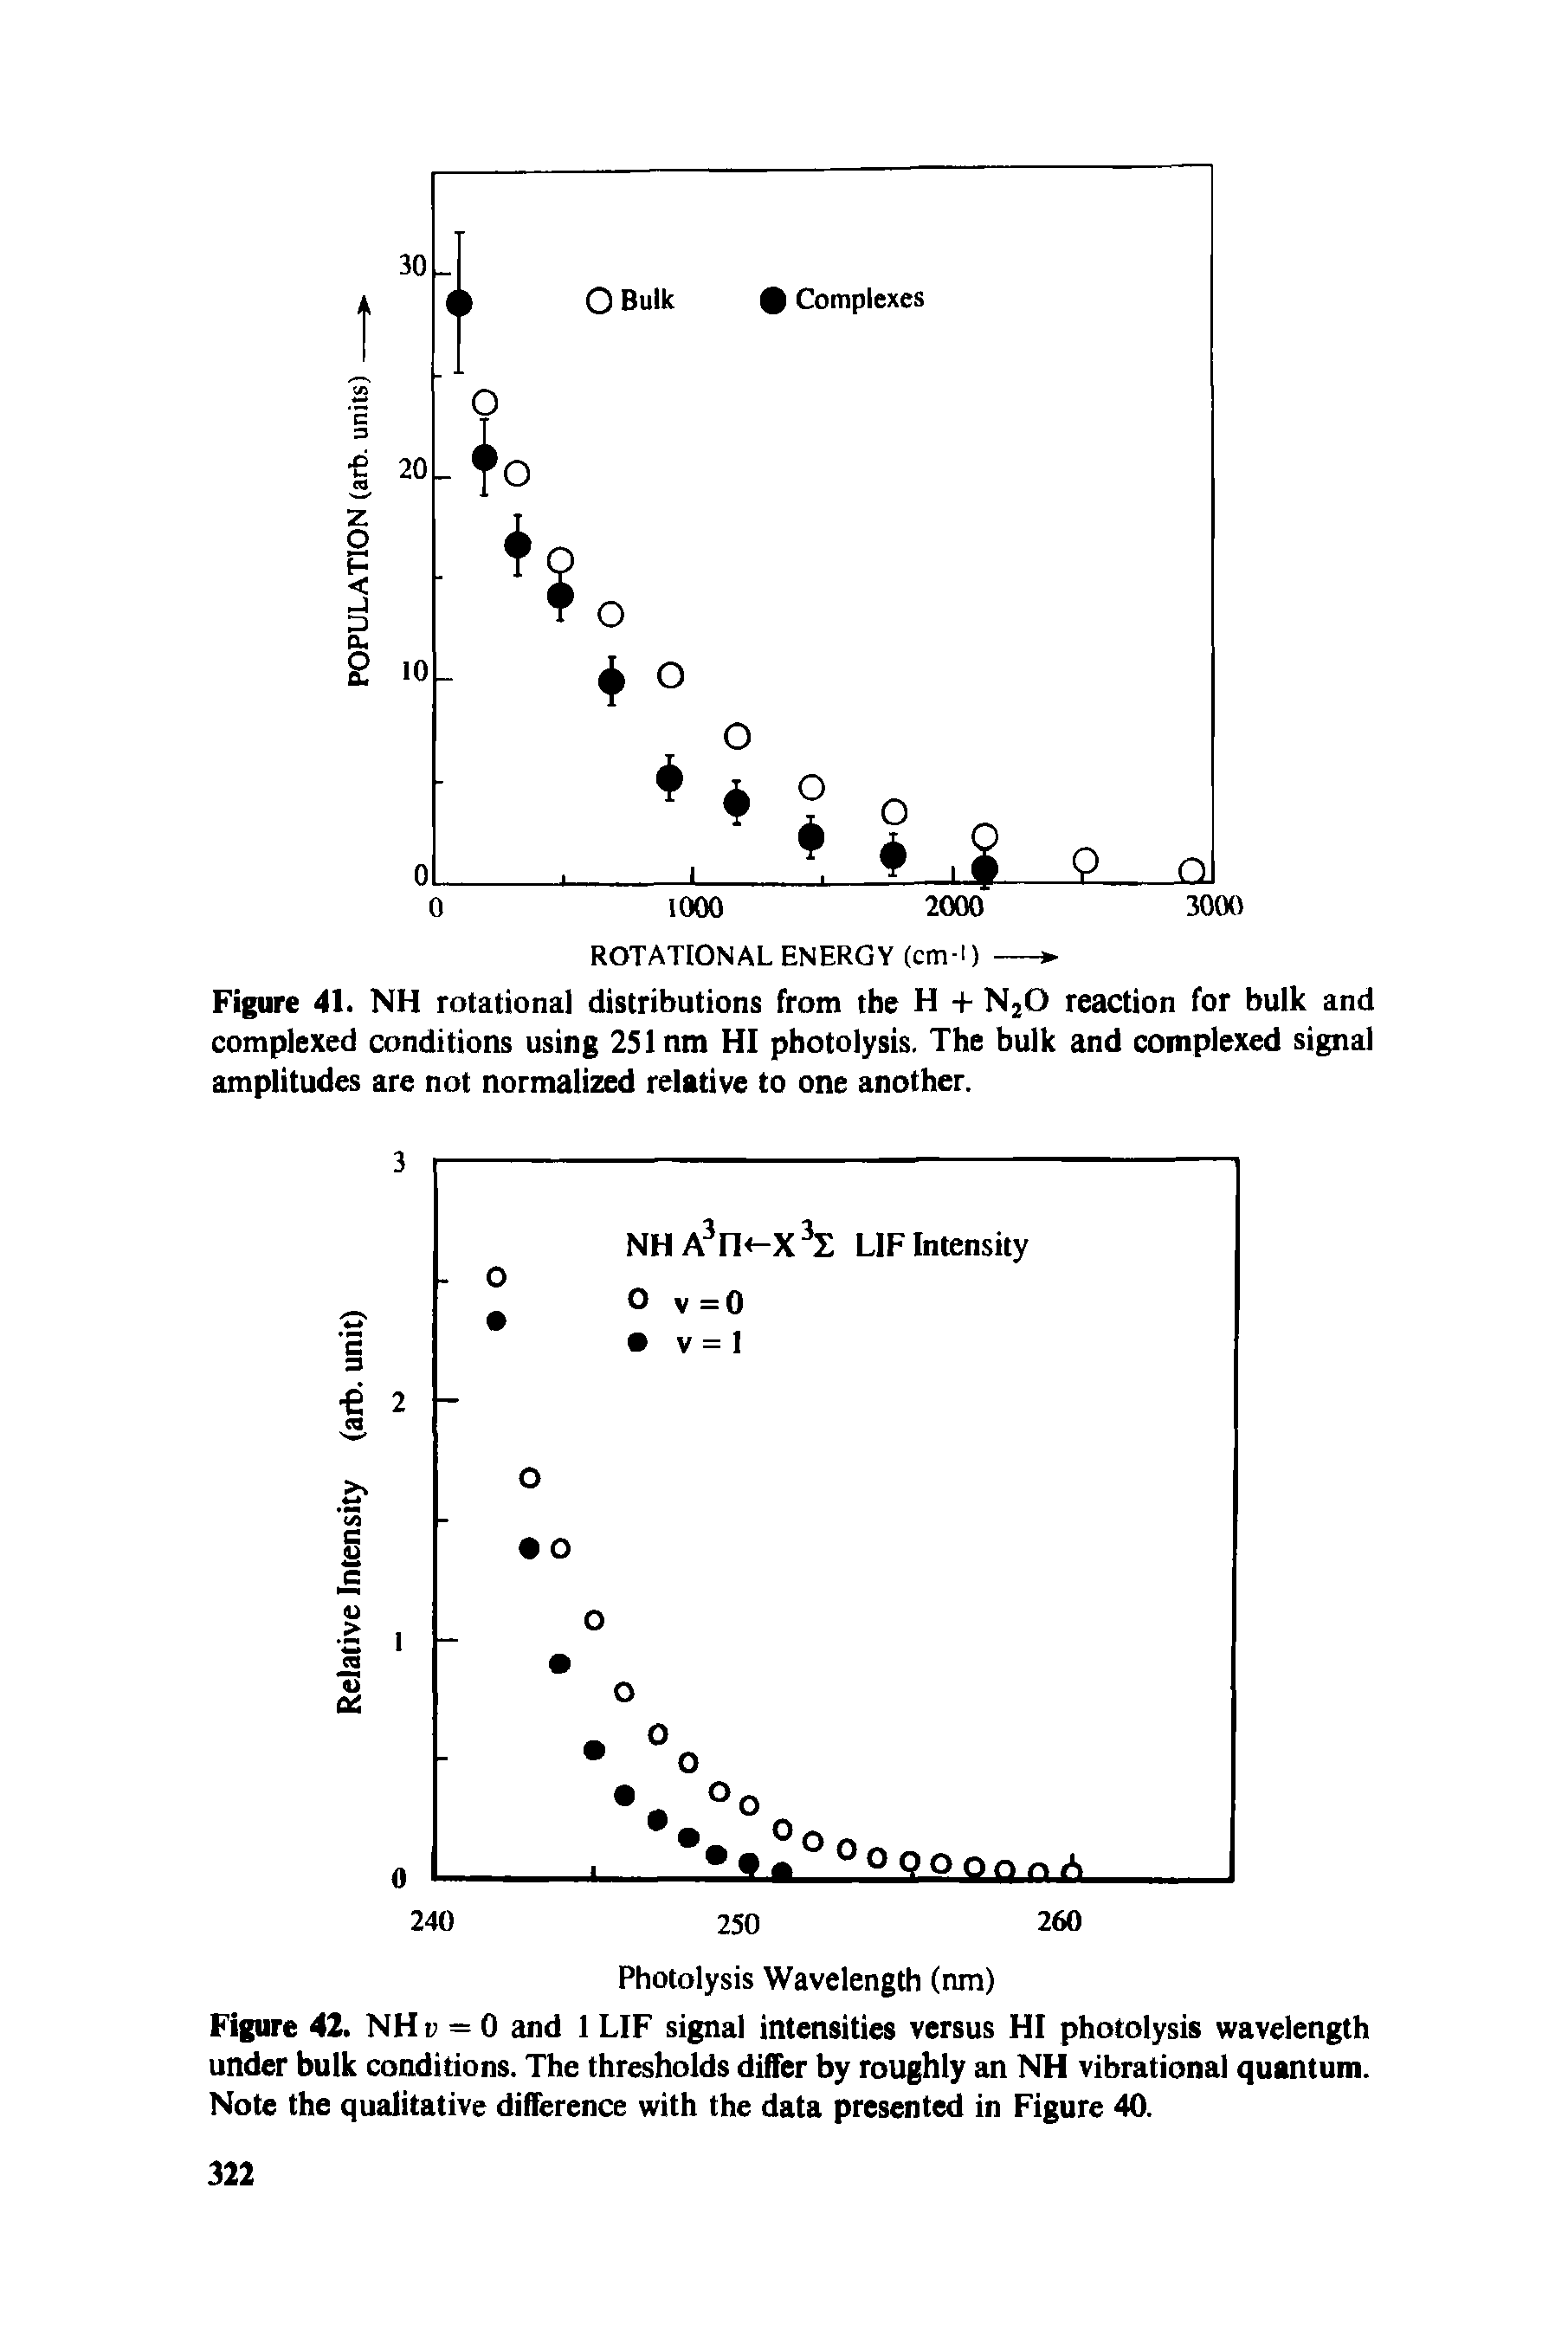 Figure 42. NHu = 0 and 1 LIF signal intensities versus HI photolysis wavelength under bulk conditions. The thresholds differ by roughly an NH vibrational quantum. Note the qualitative difference with the data presented in Figure 40.